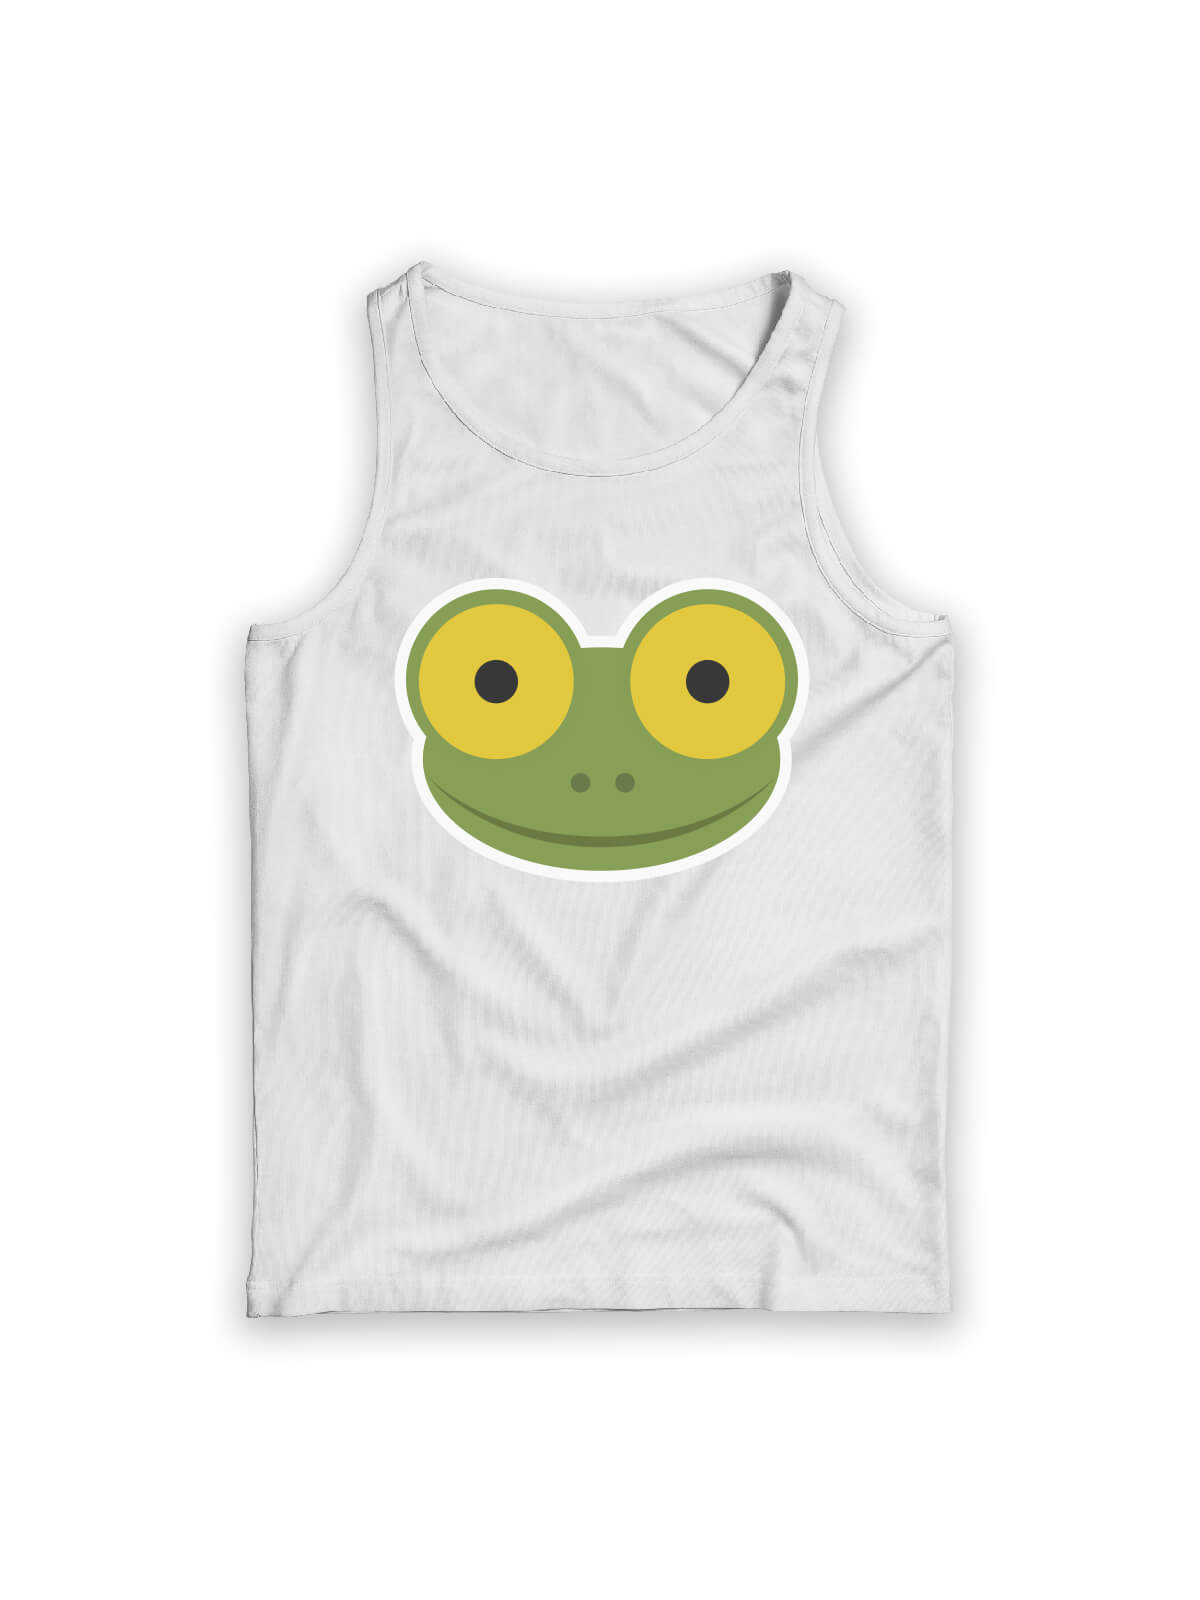 white tank top with Mike the frog face